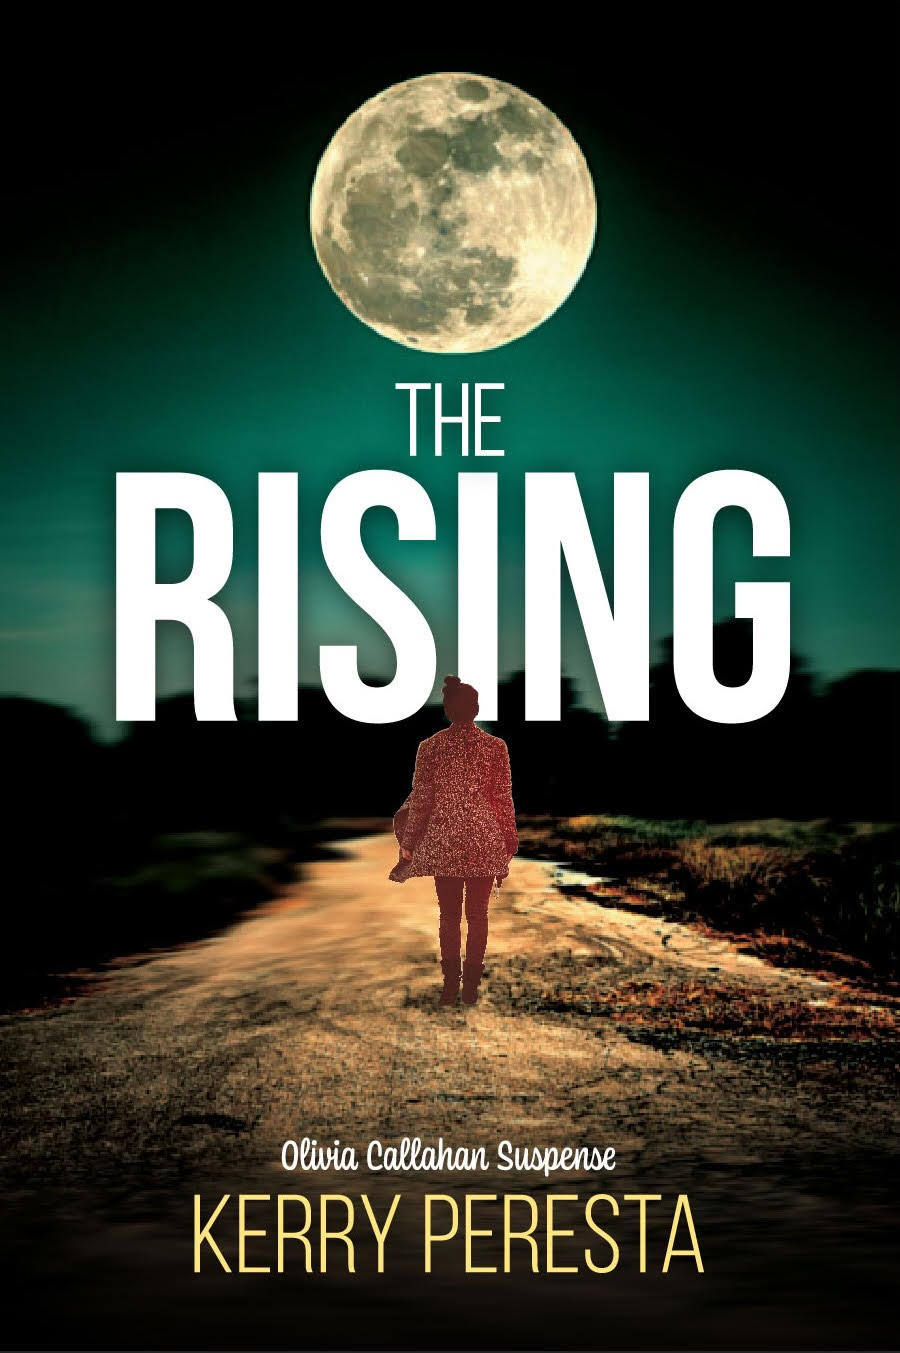 The Rising by Kerry L Peresta